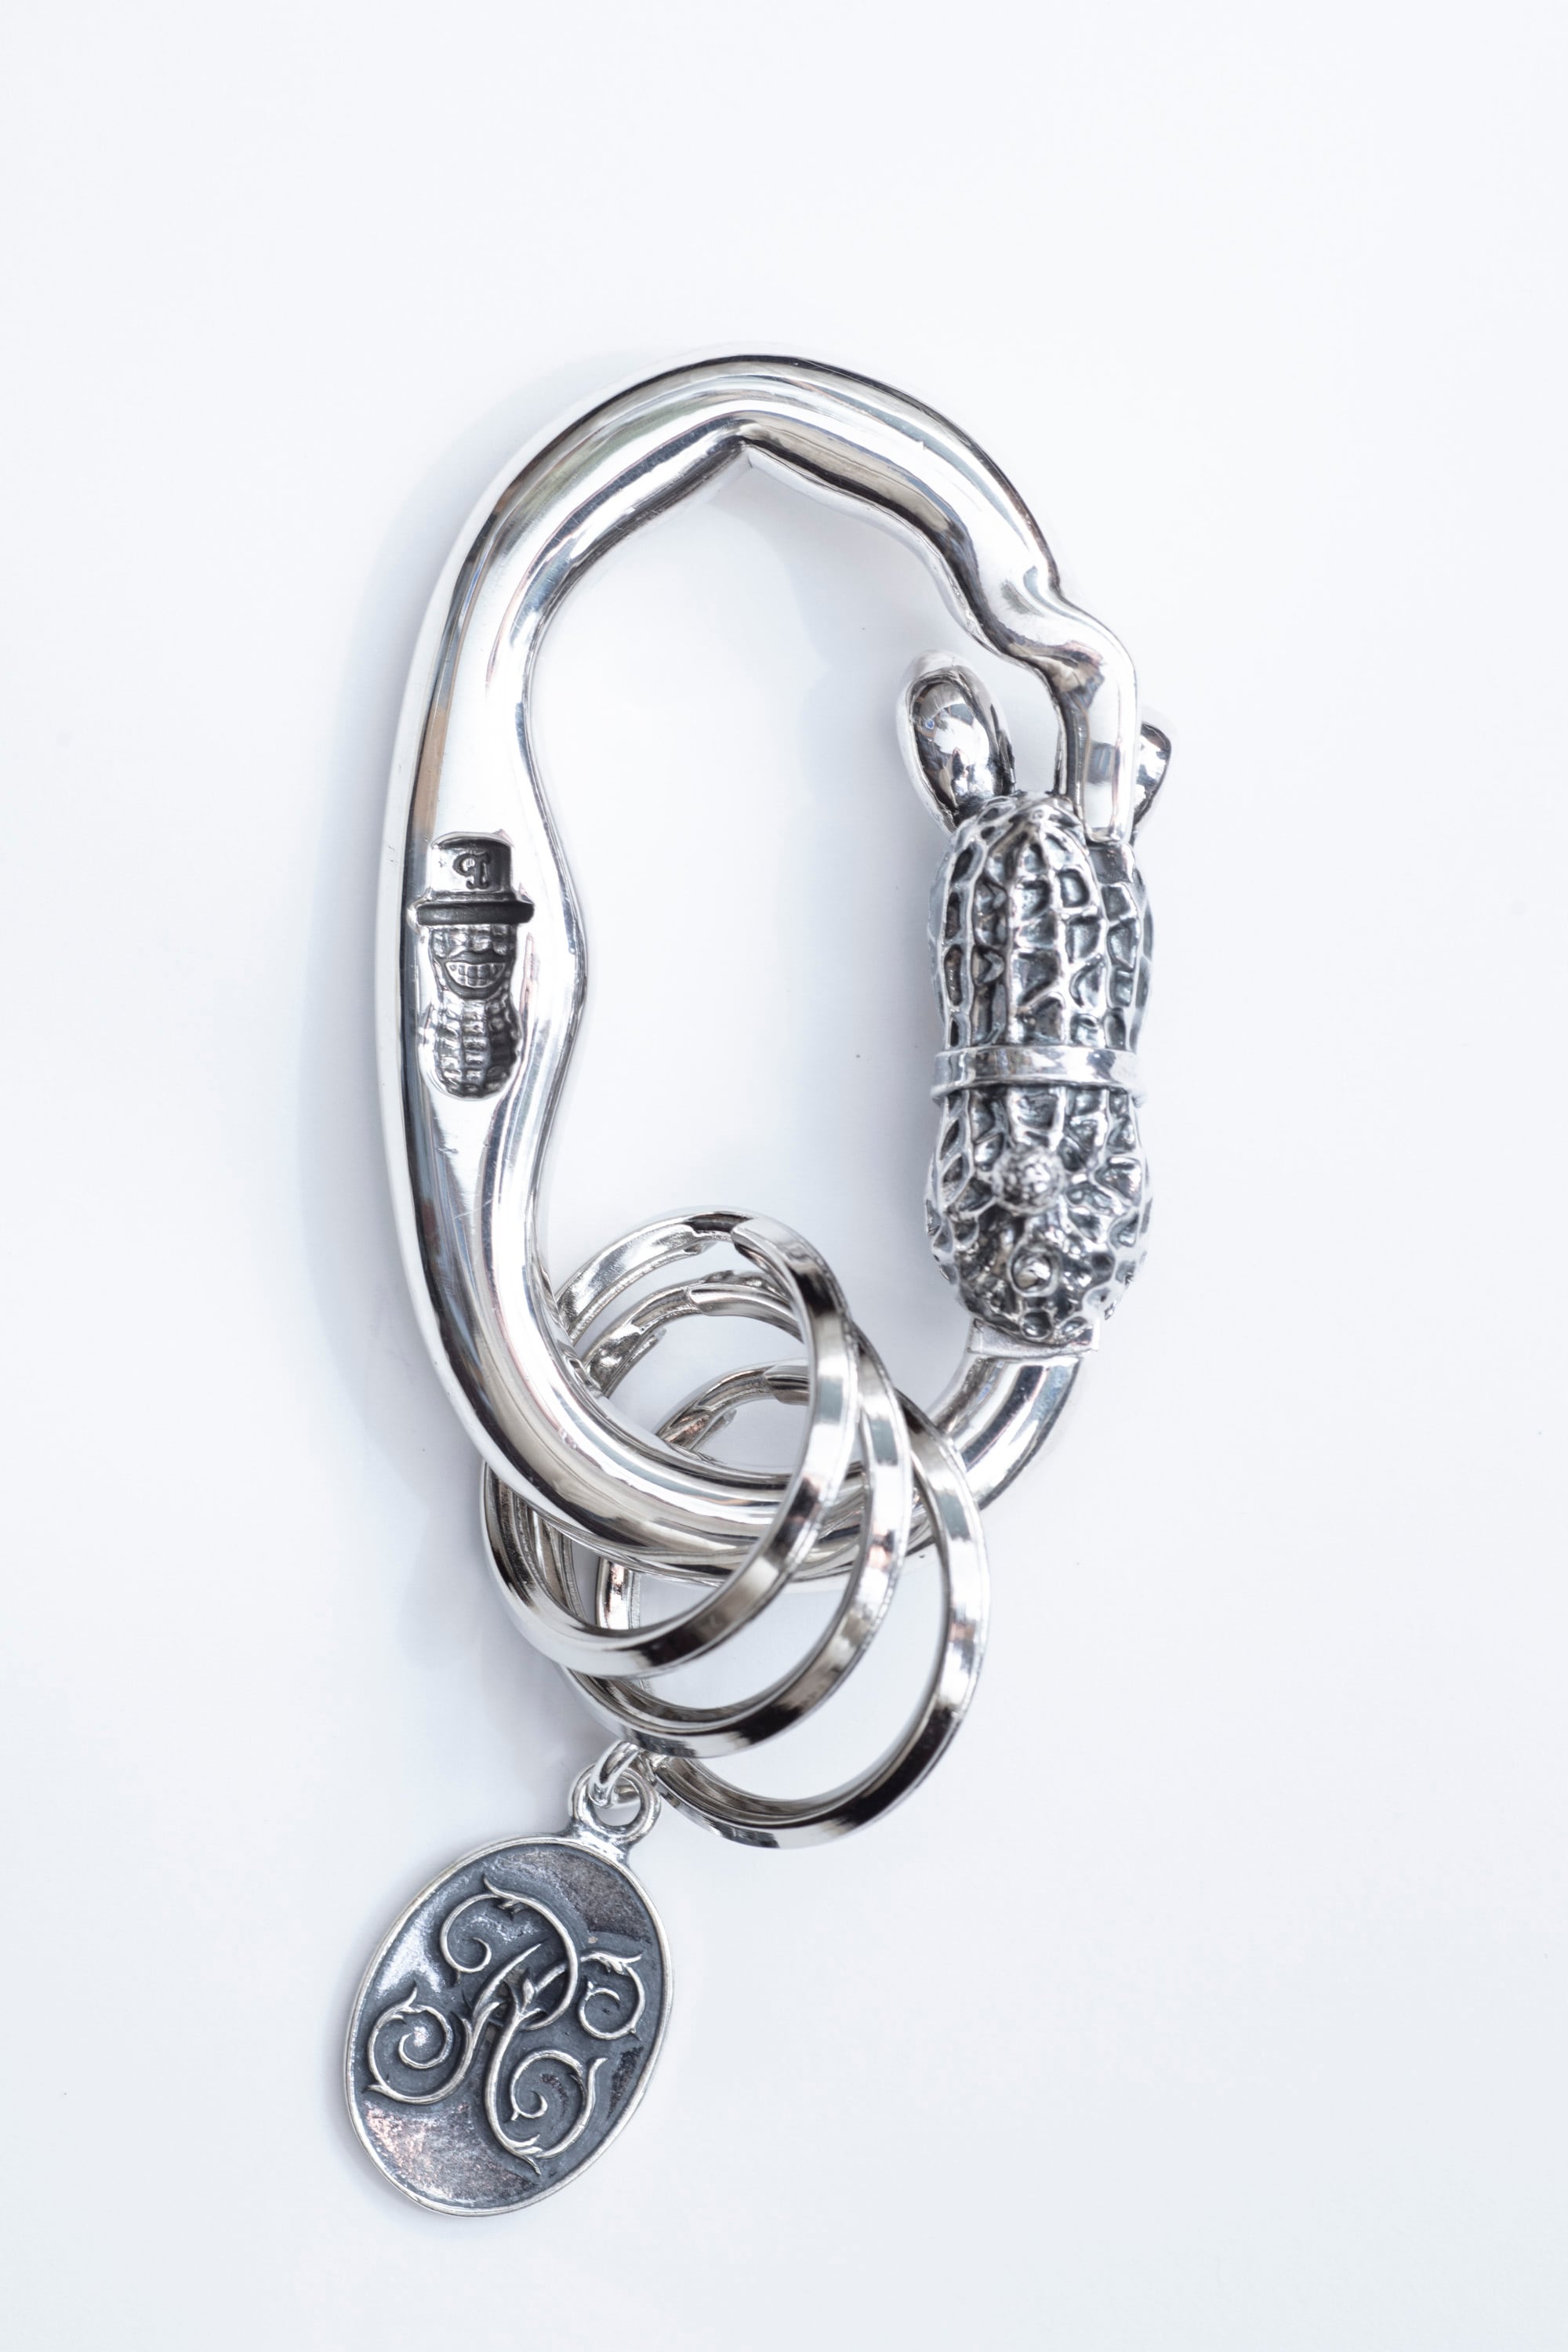 Peanuts&Co. CARABINER BUNNY PEANUTS silver x k10PG – unexpected store